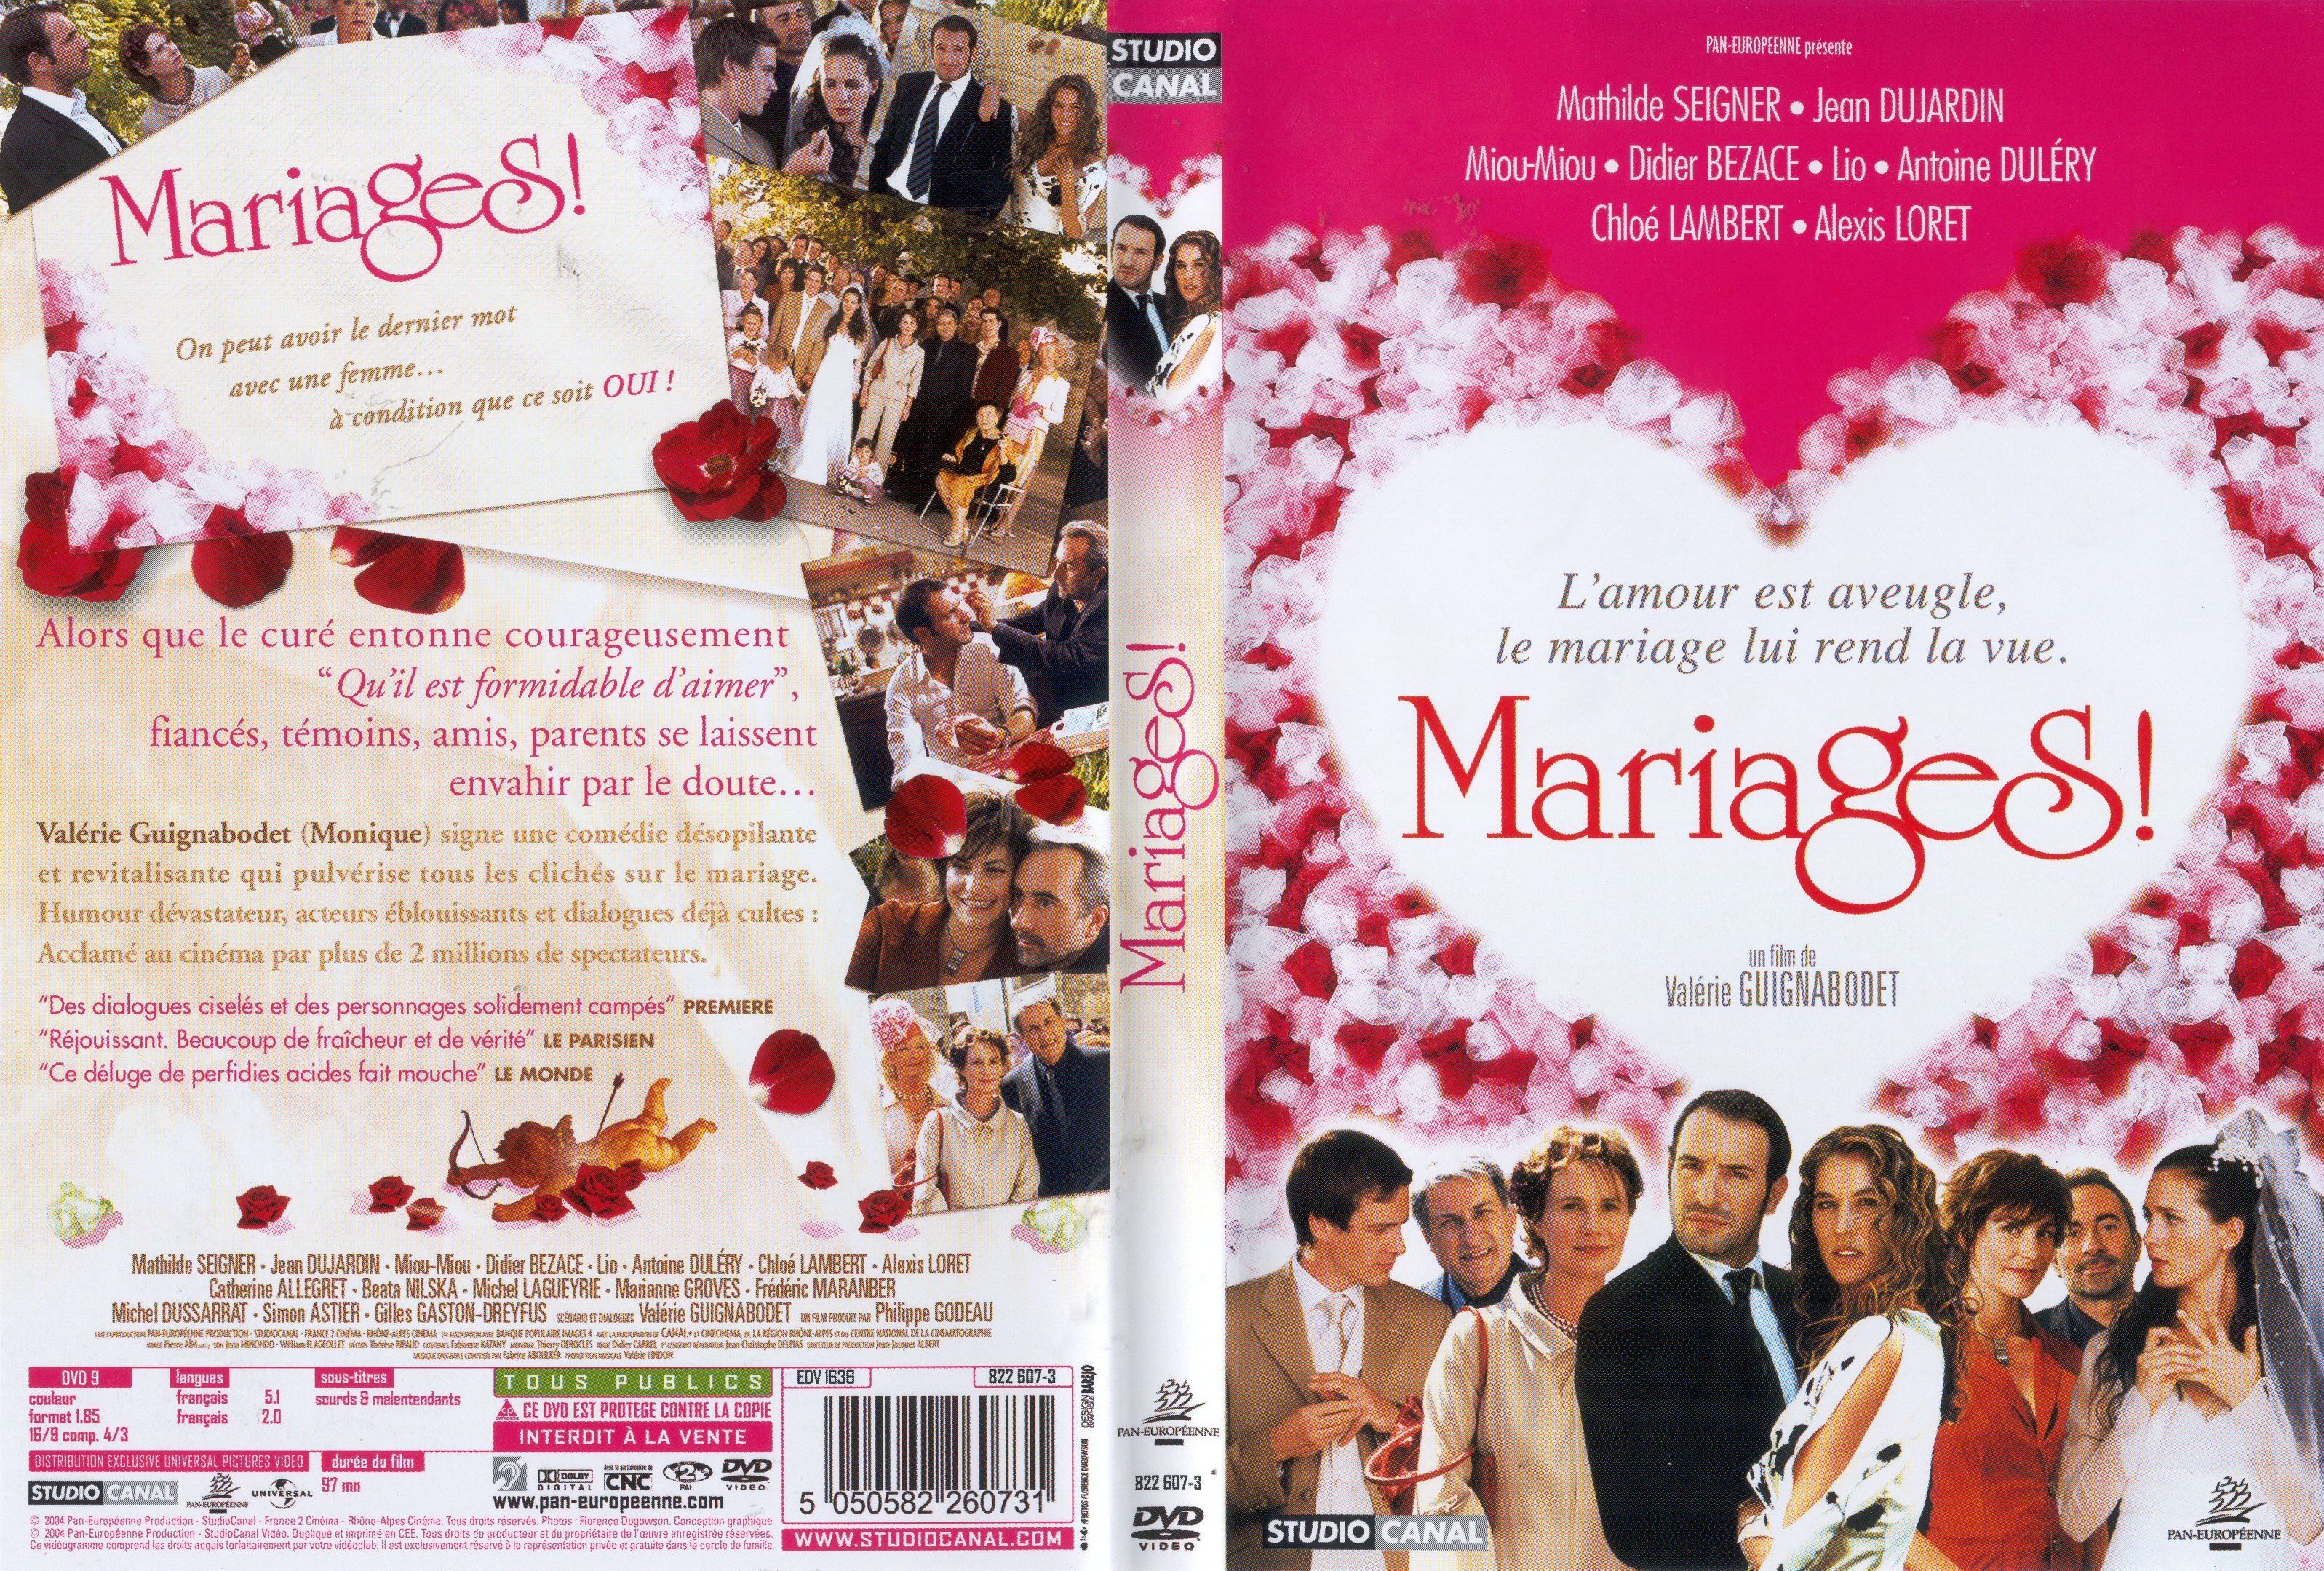 Jaquette DVD Mariages